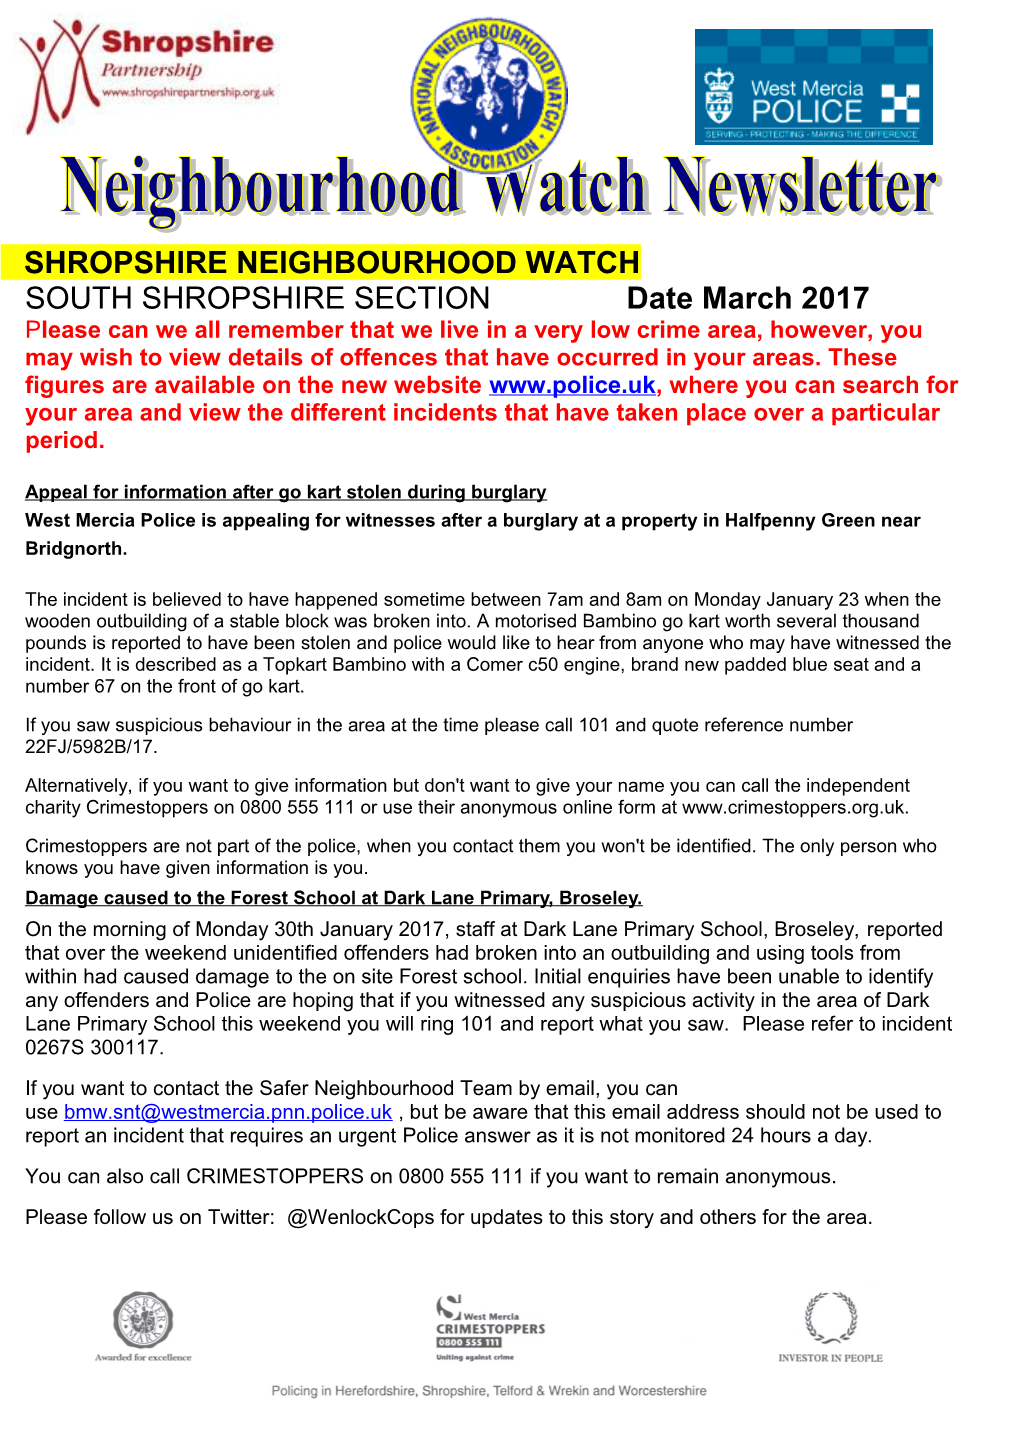 From Shelly Sidwell, Shropshire Division Neighbourhood Watch Clerk